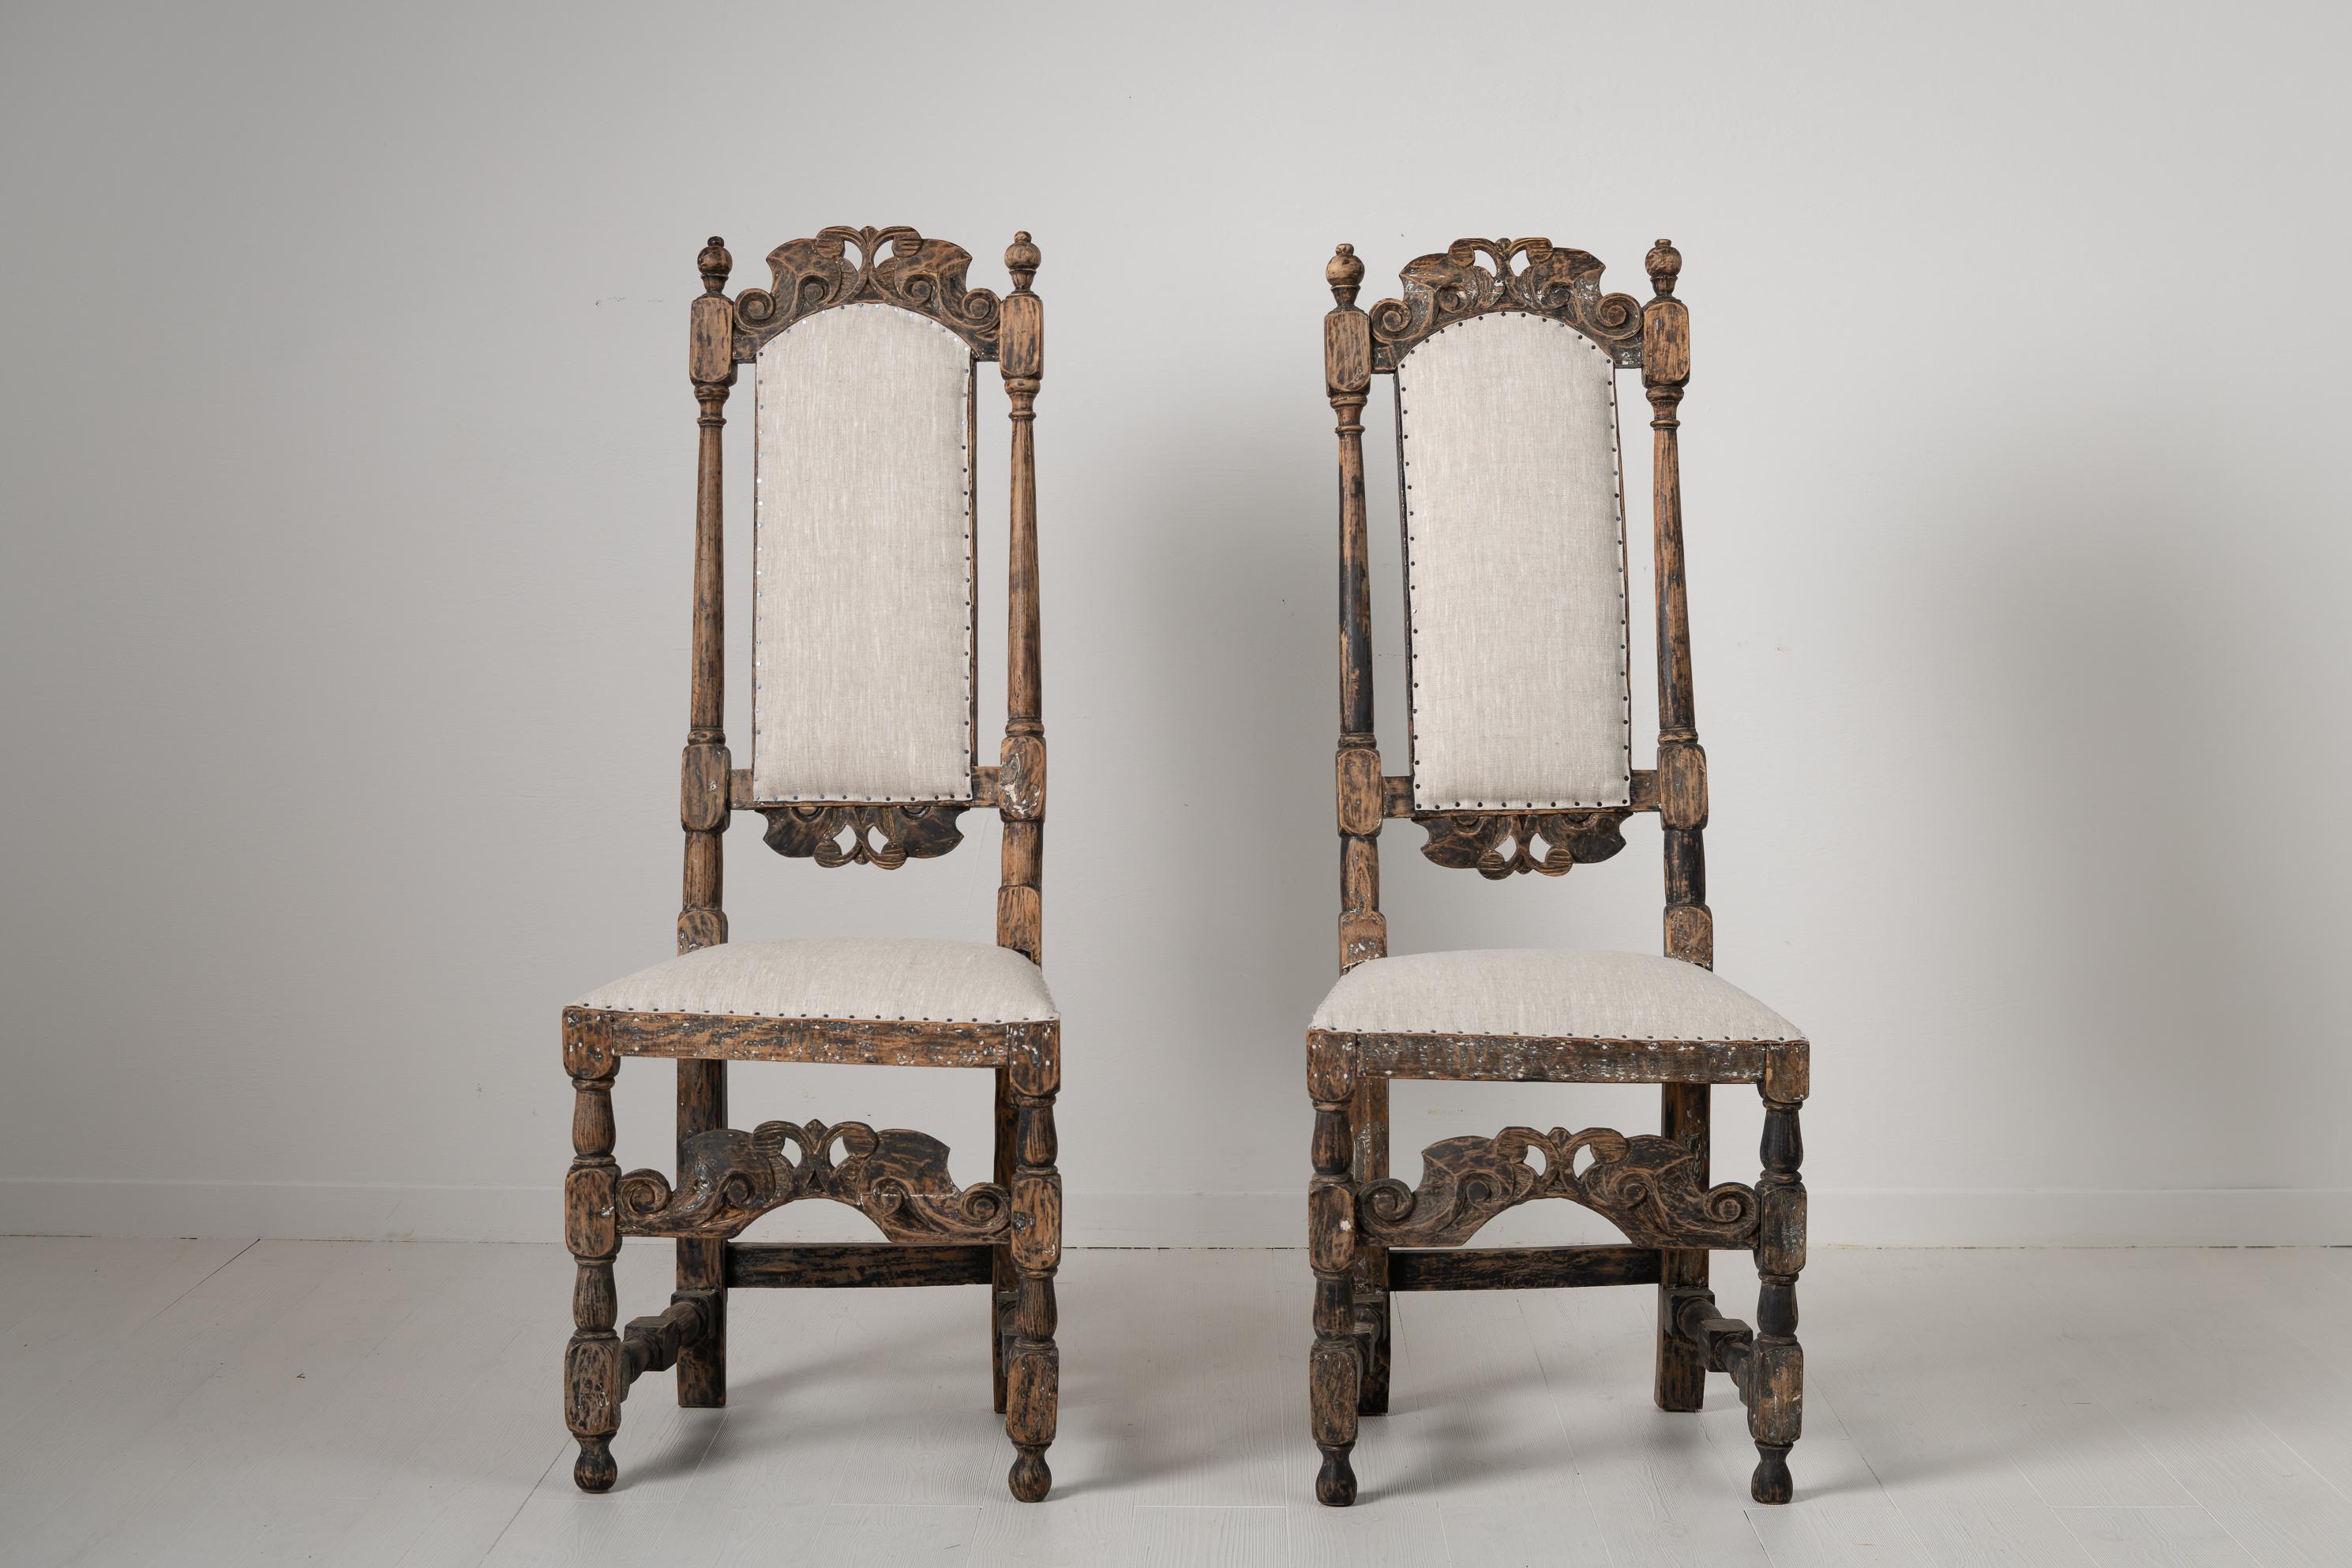 Swedish mid 18th century pair of baroque chairs. The chairs are hardwood and dry scraped to old historic paint. They have an ornate wooden decor carved by hand, the backrest and front are especially detailed. Completely renovated seats with new